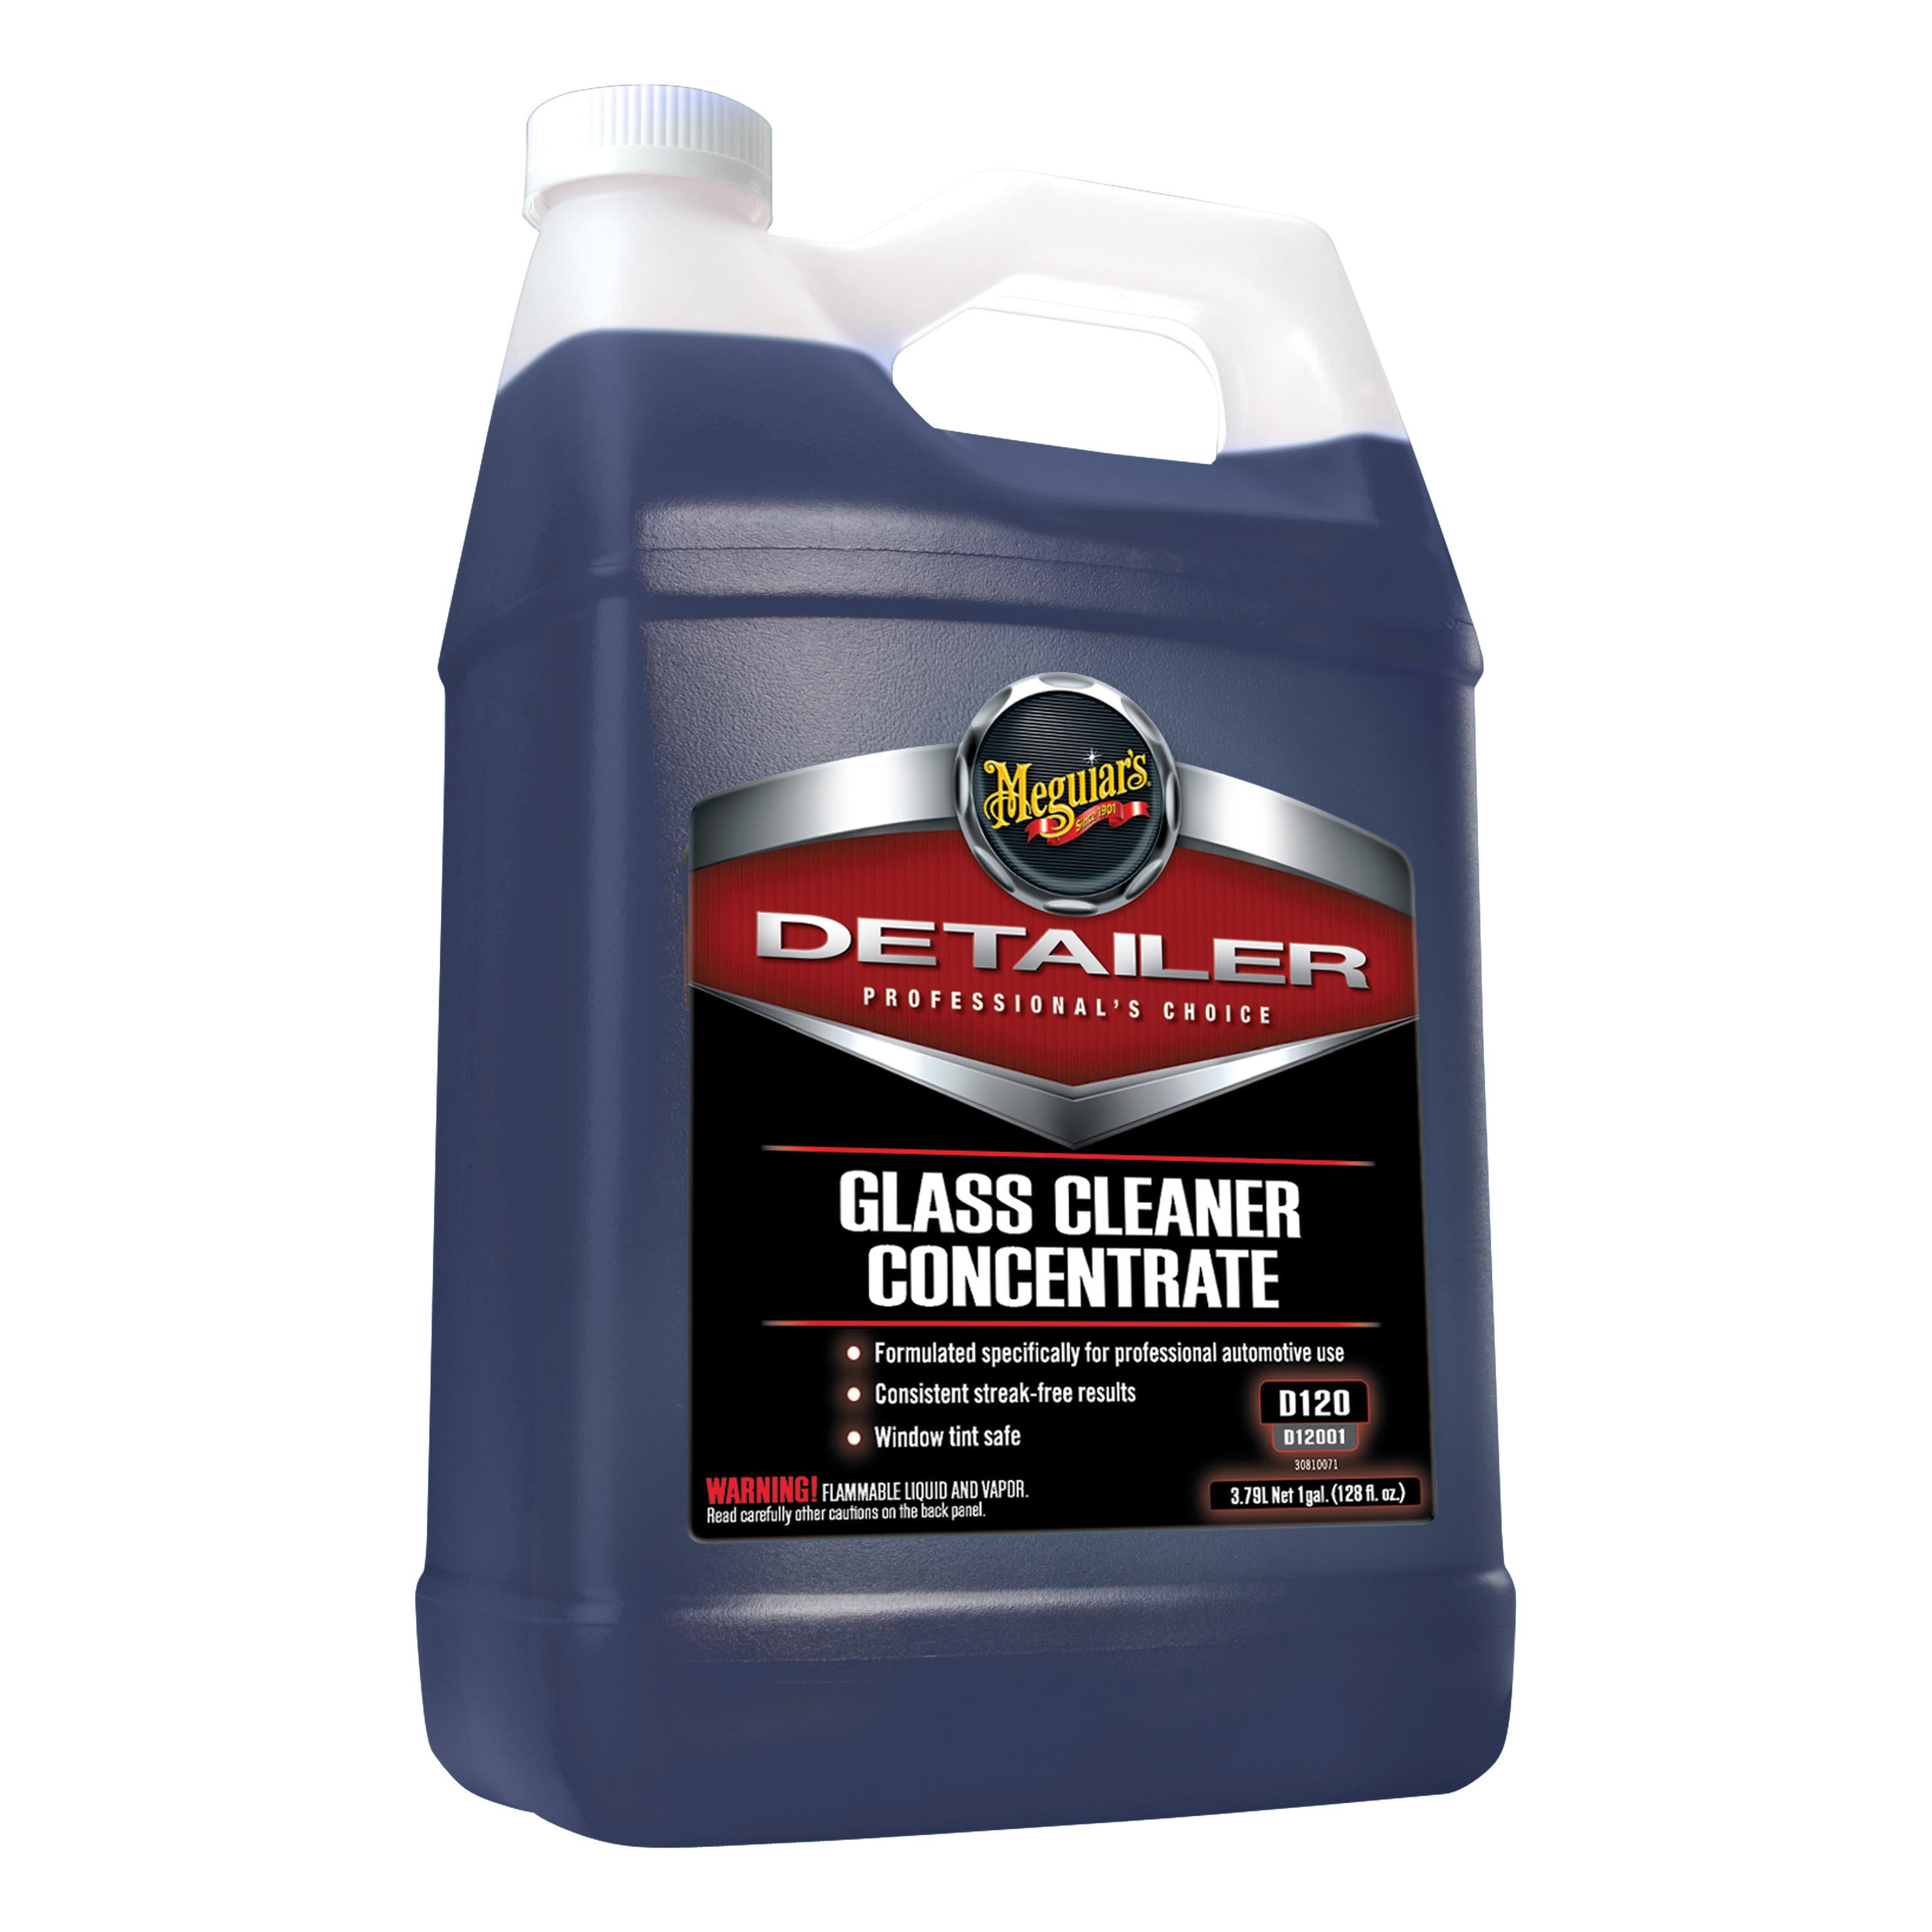 Detailer Glass Cleaner Concentrate